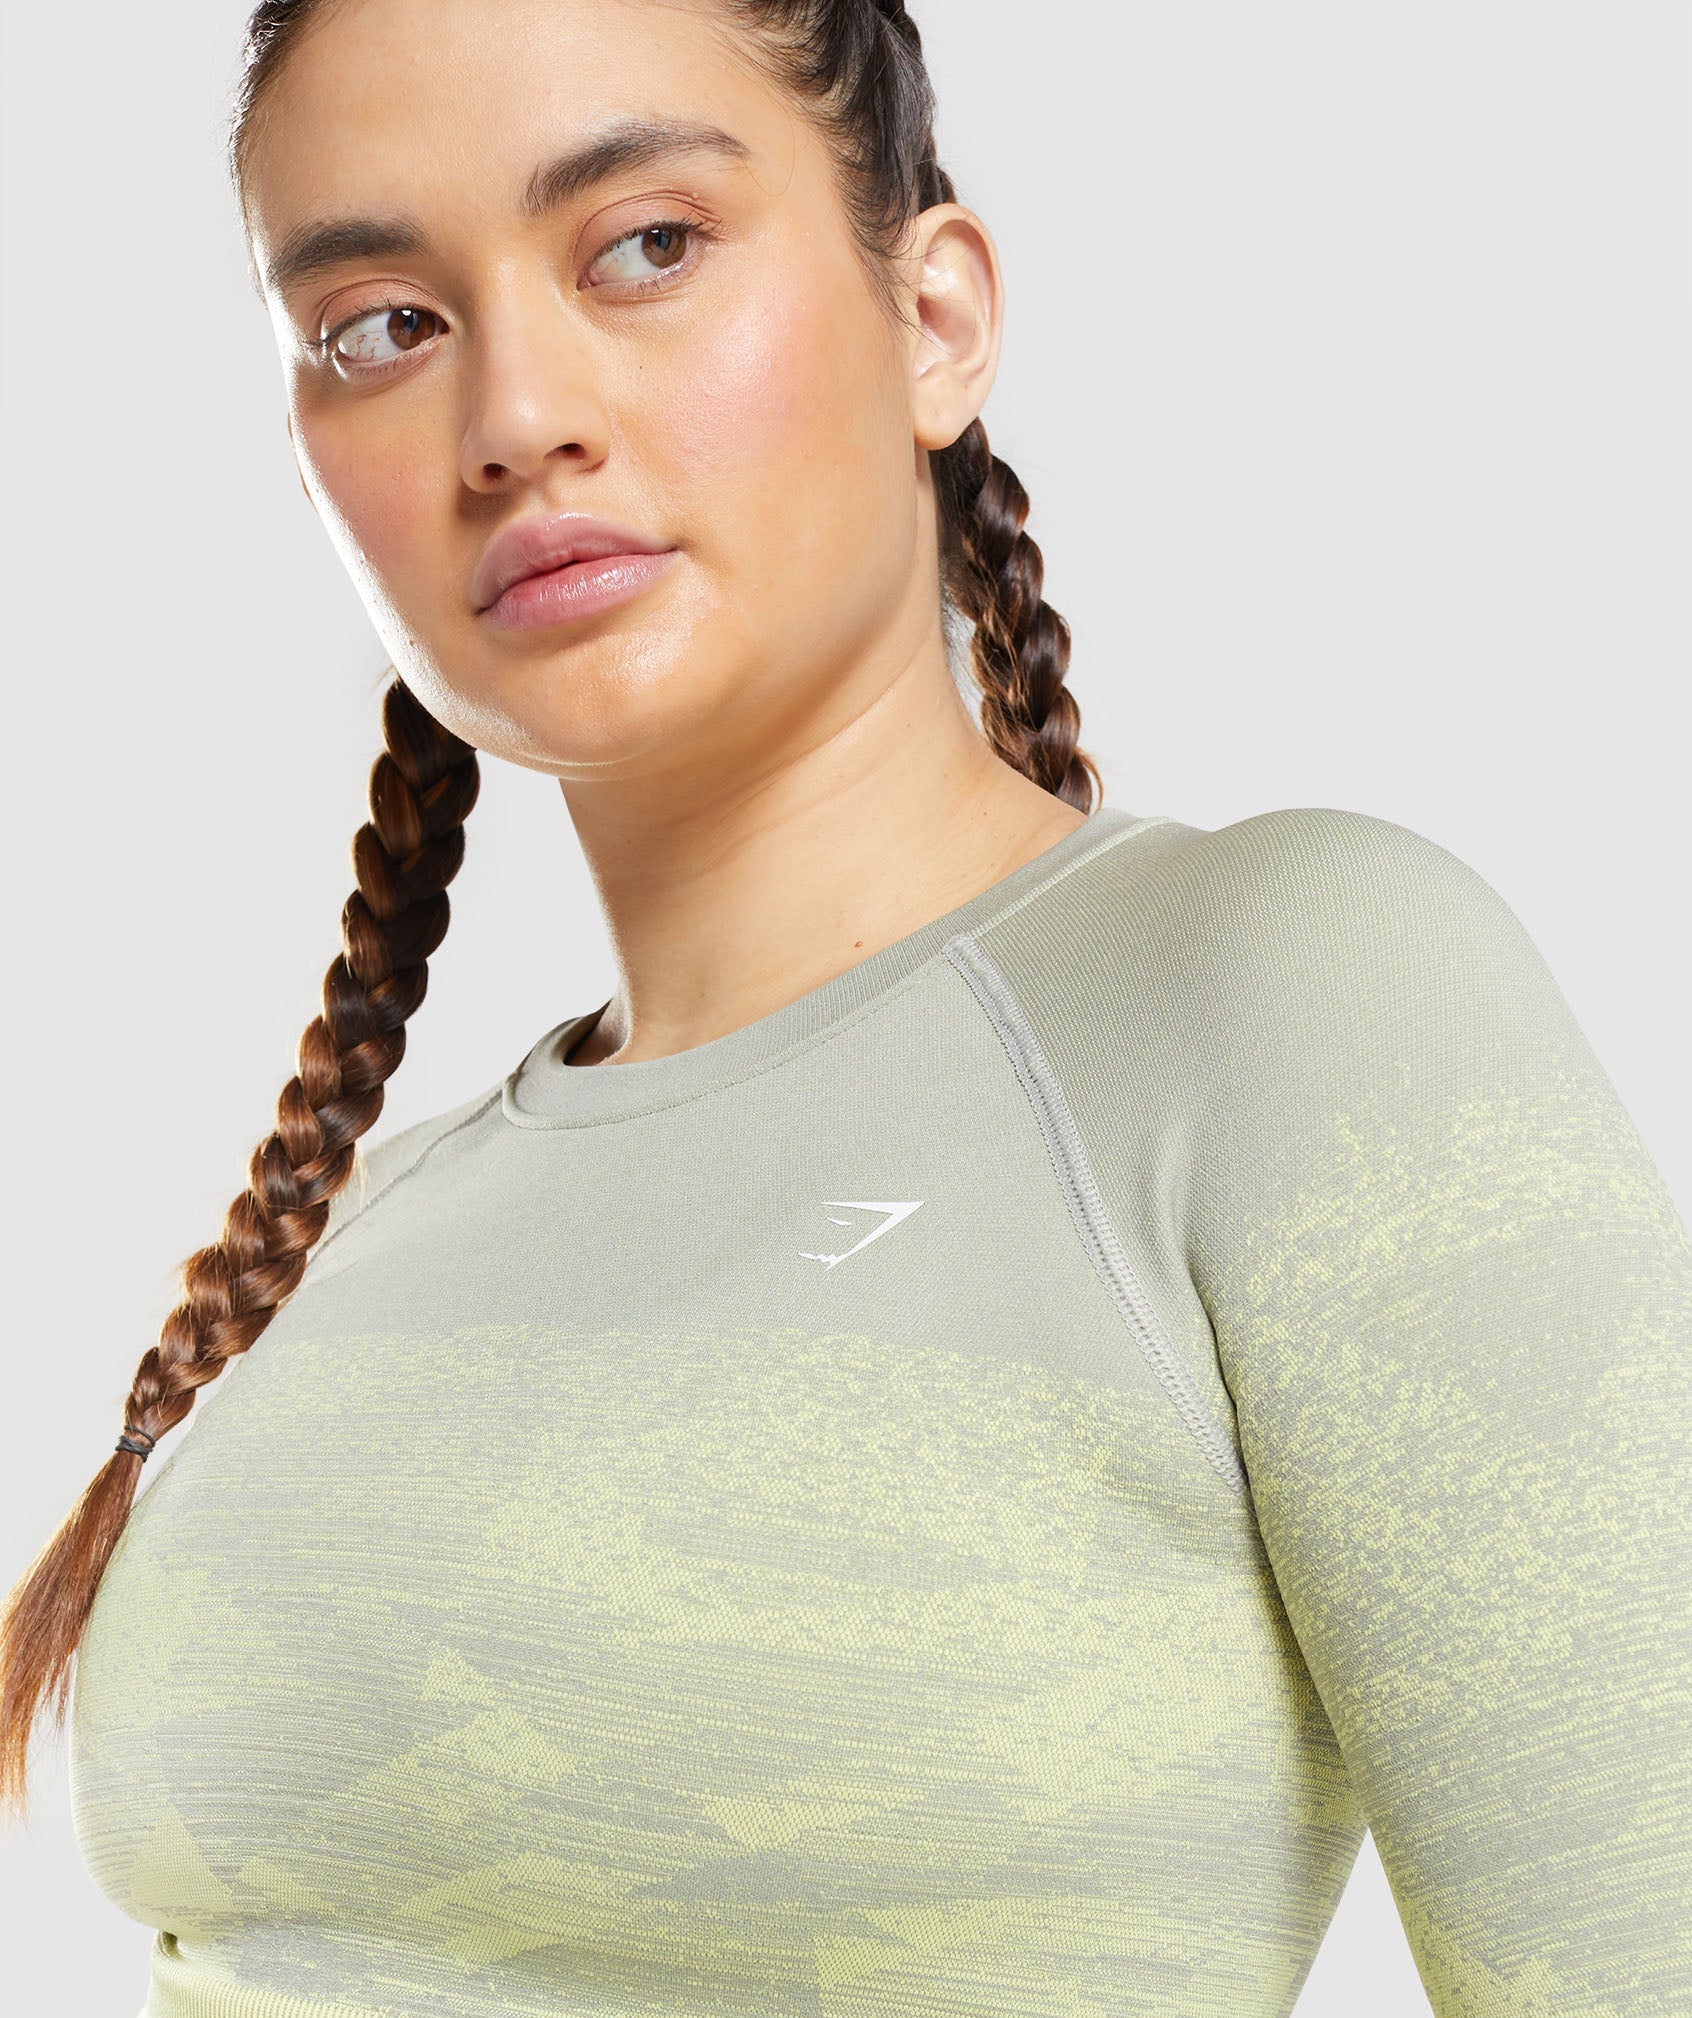 Adapt Ombre Crop Top in Triangle | Taupe Grey - view 5